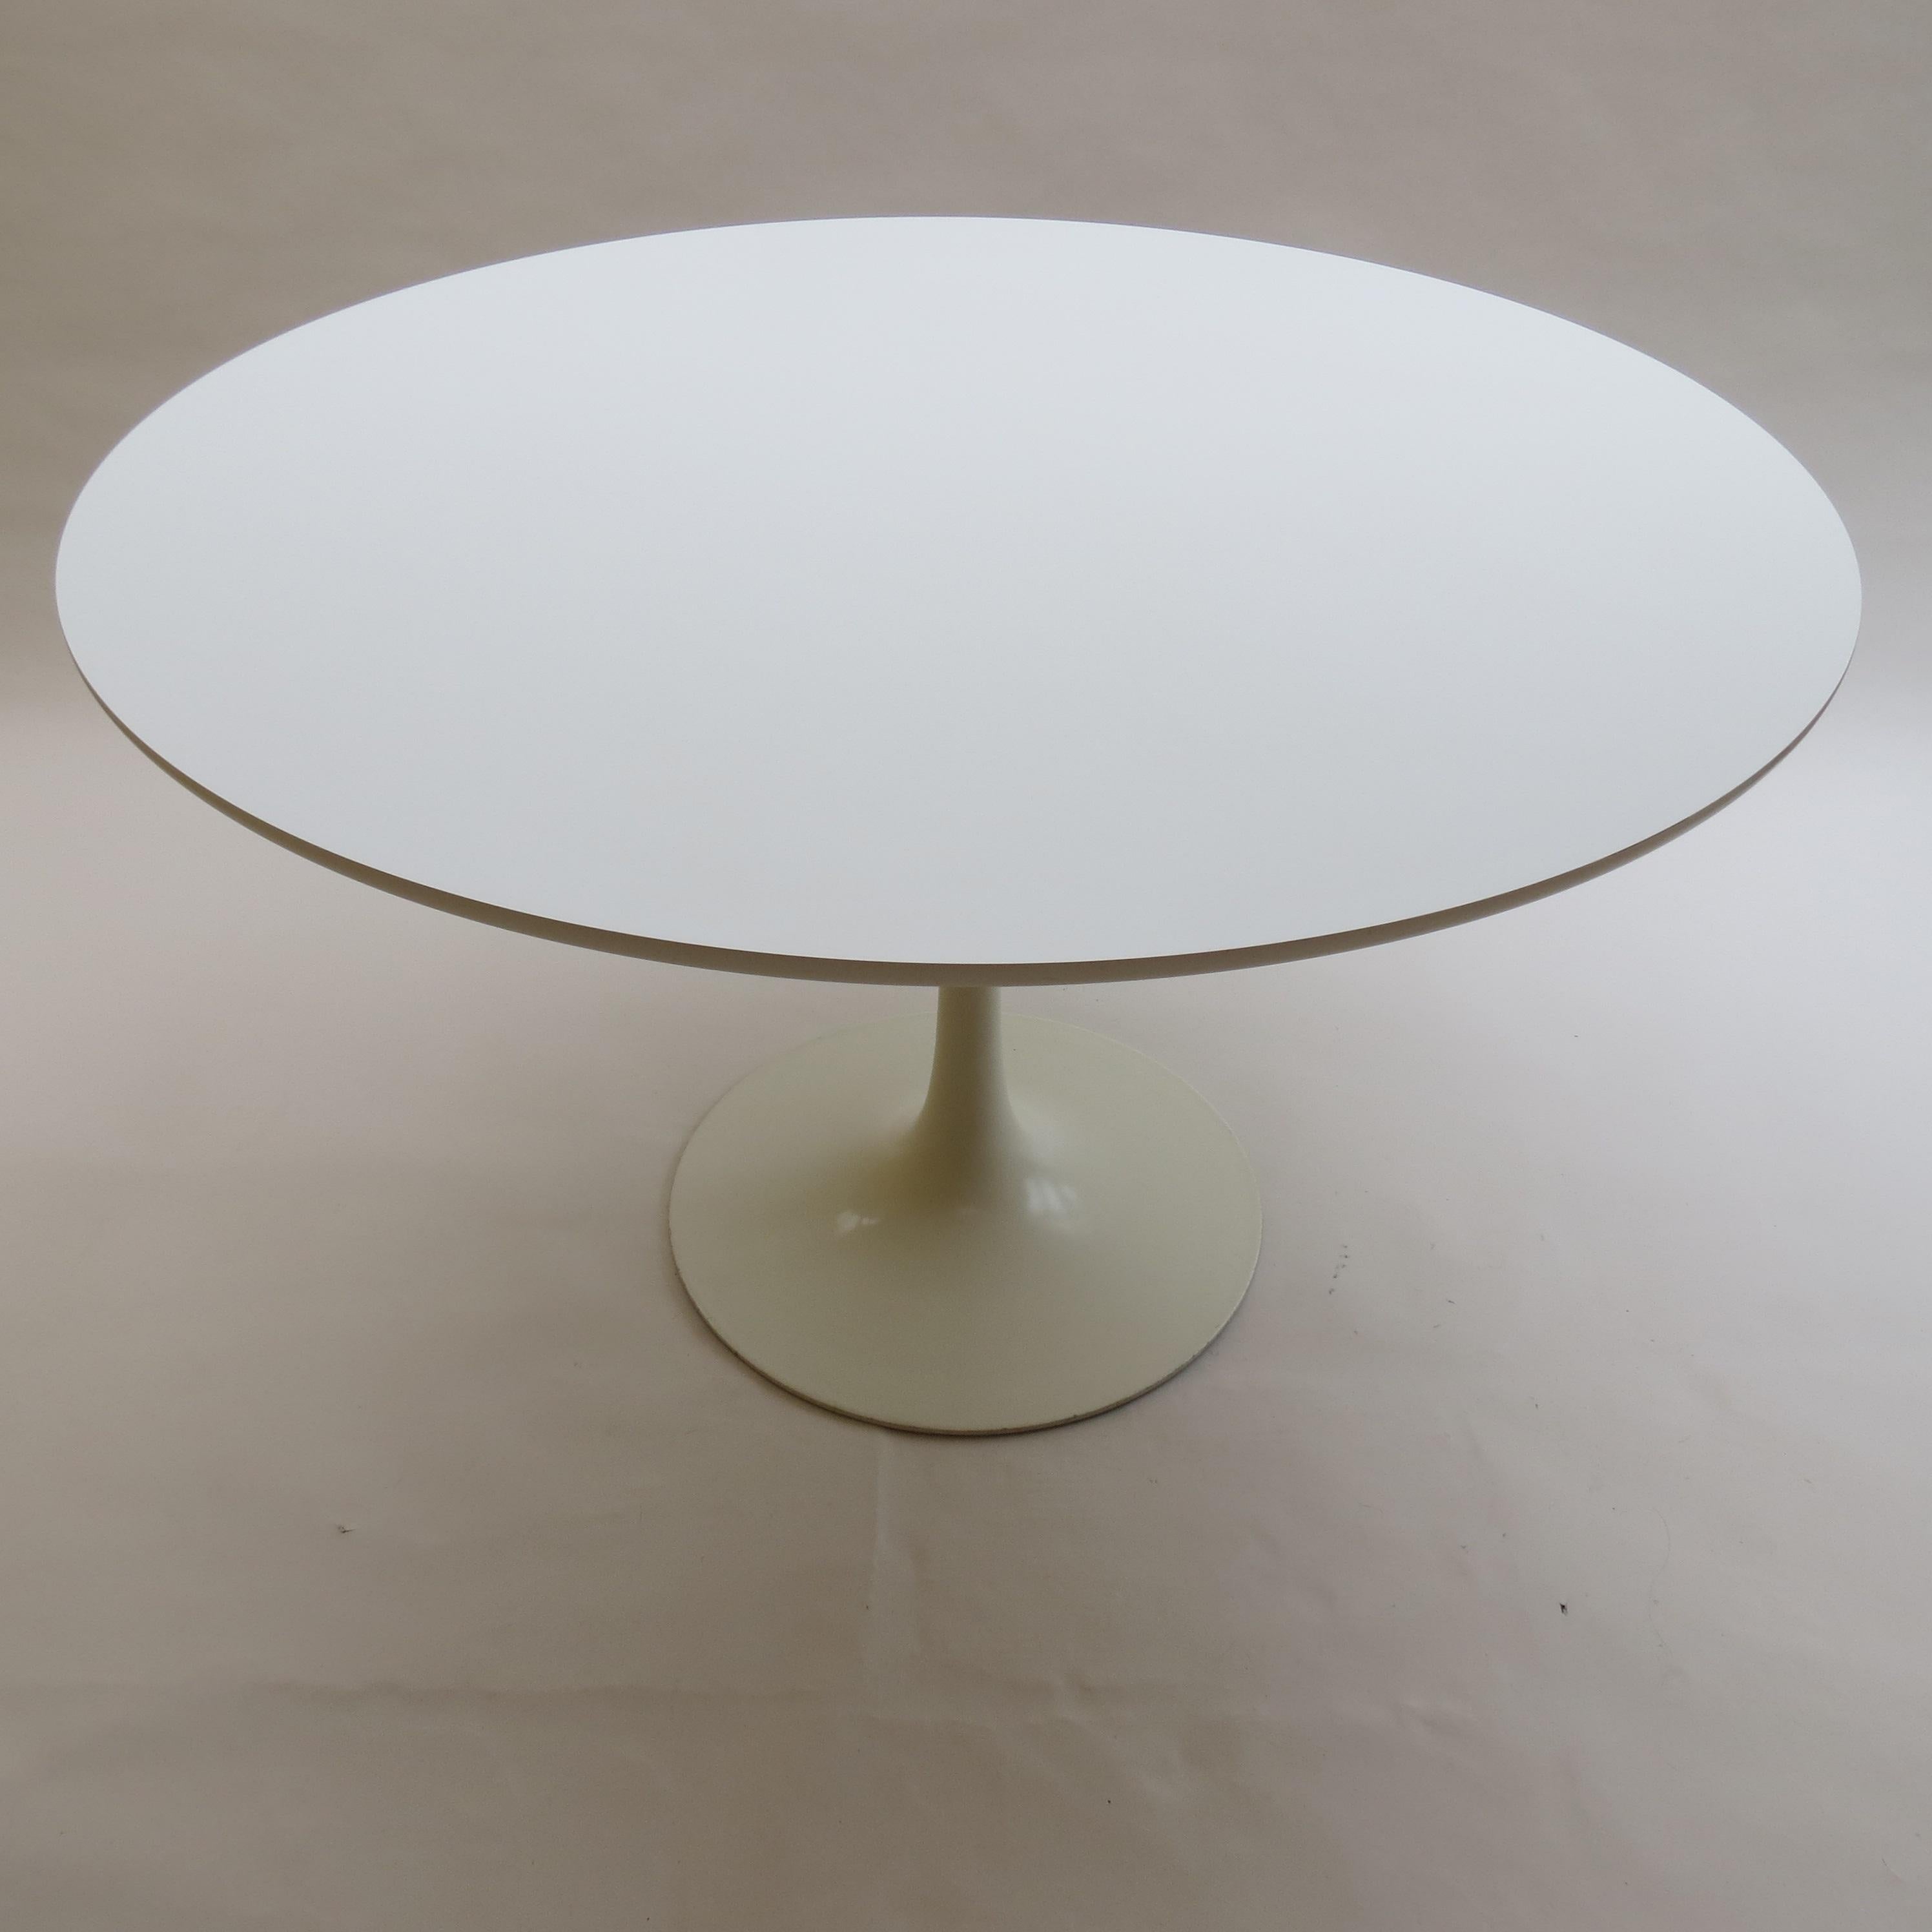 1960s White Tulip Dining Table by Maurice Burke for Arkana UK

White Tulip dining table, manufactured by Arkana, Bath UK and designed by Maurice Burke in the 1960s.

Painted cast aluminium base and formica top.

Stamped Arkana to underside of